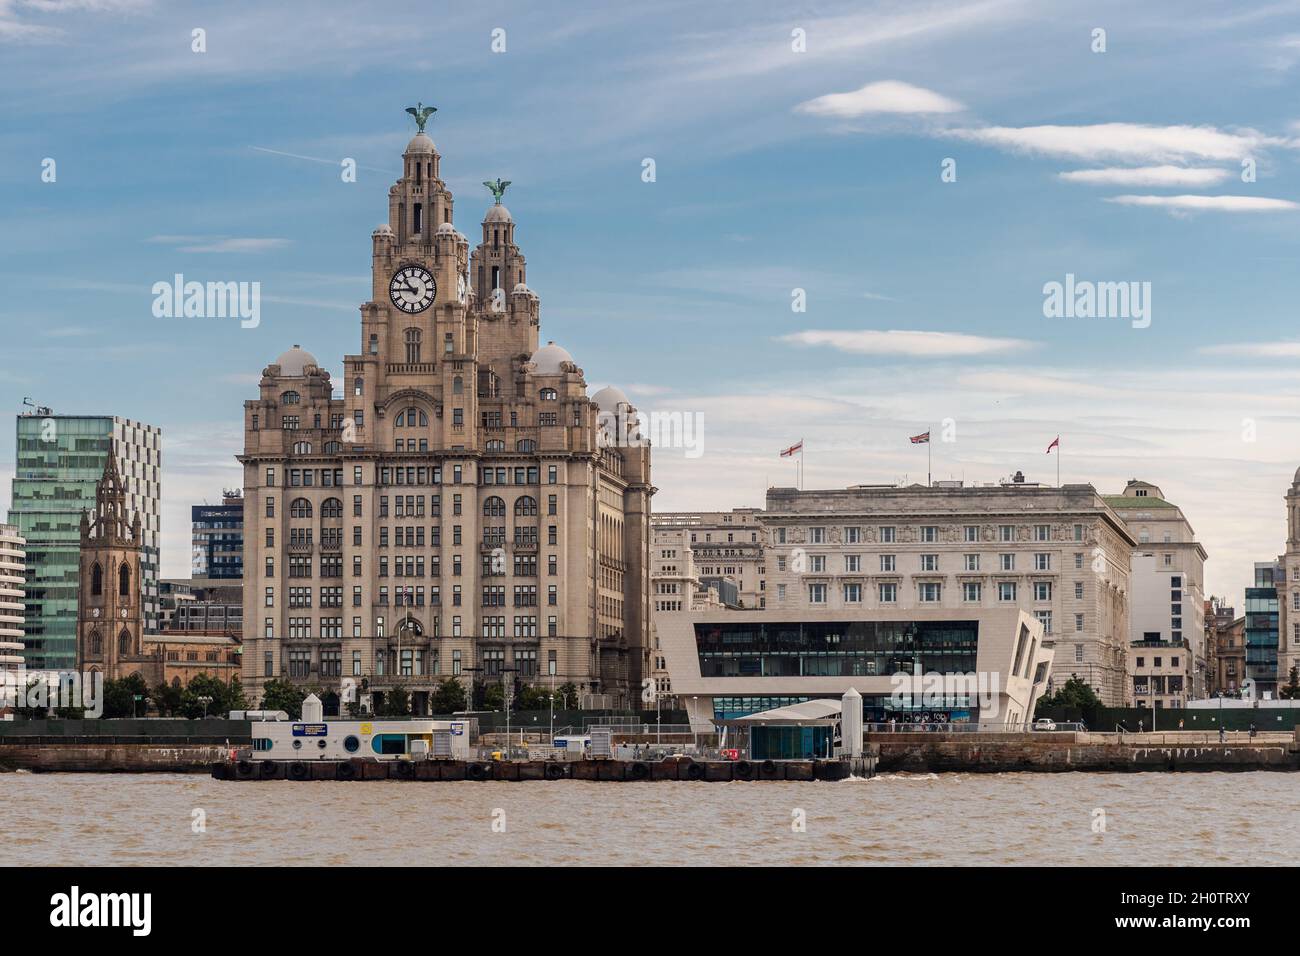 Royal Liver Building and Mersey Ferry Terminal from the Mersey Ferry, Liverpool, Merseyside, UK. Stock Photo